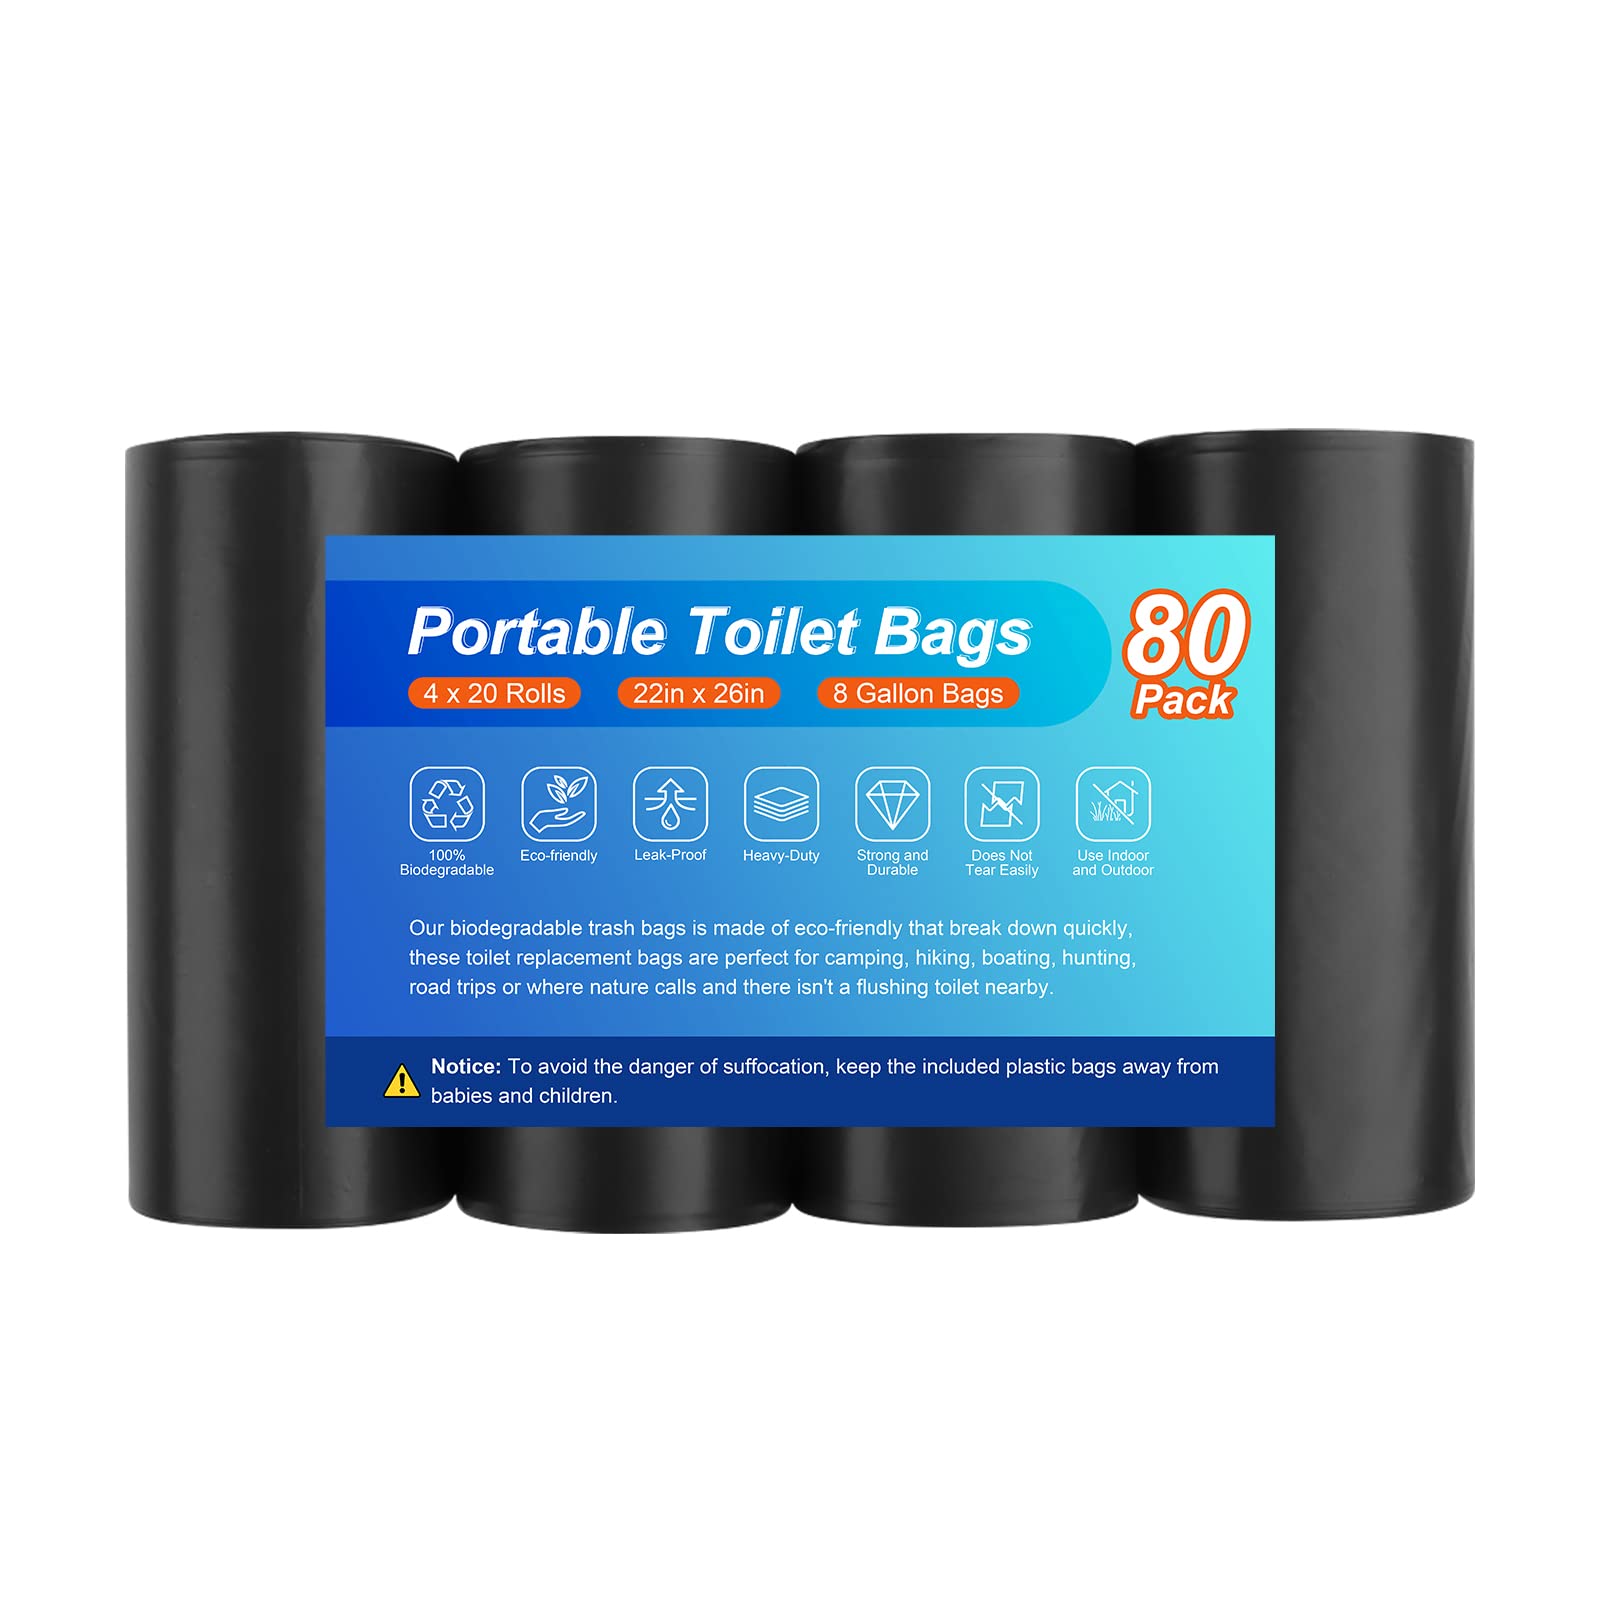 80 Portable Toilet Bags for Camping, Biodegradable Porta Potty